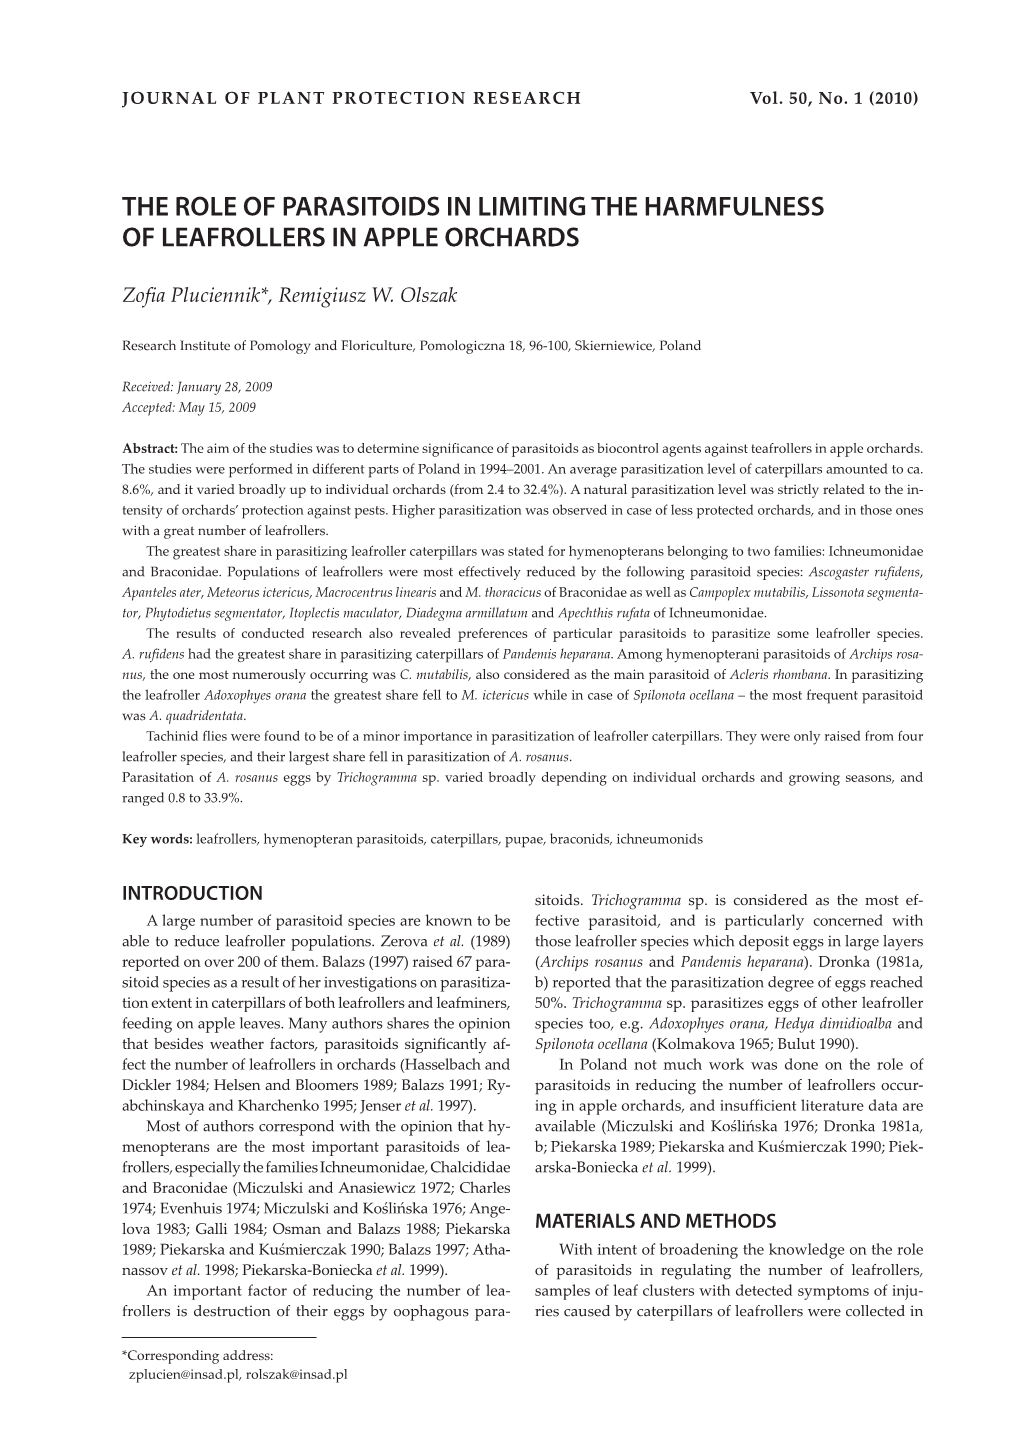 The Role of Parasitoids in Limiting the Harmfulness of Leafrollers in Apple Orchards